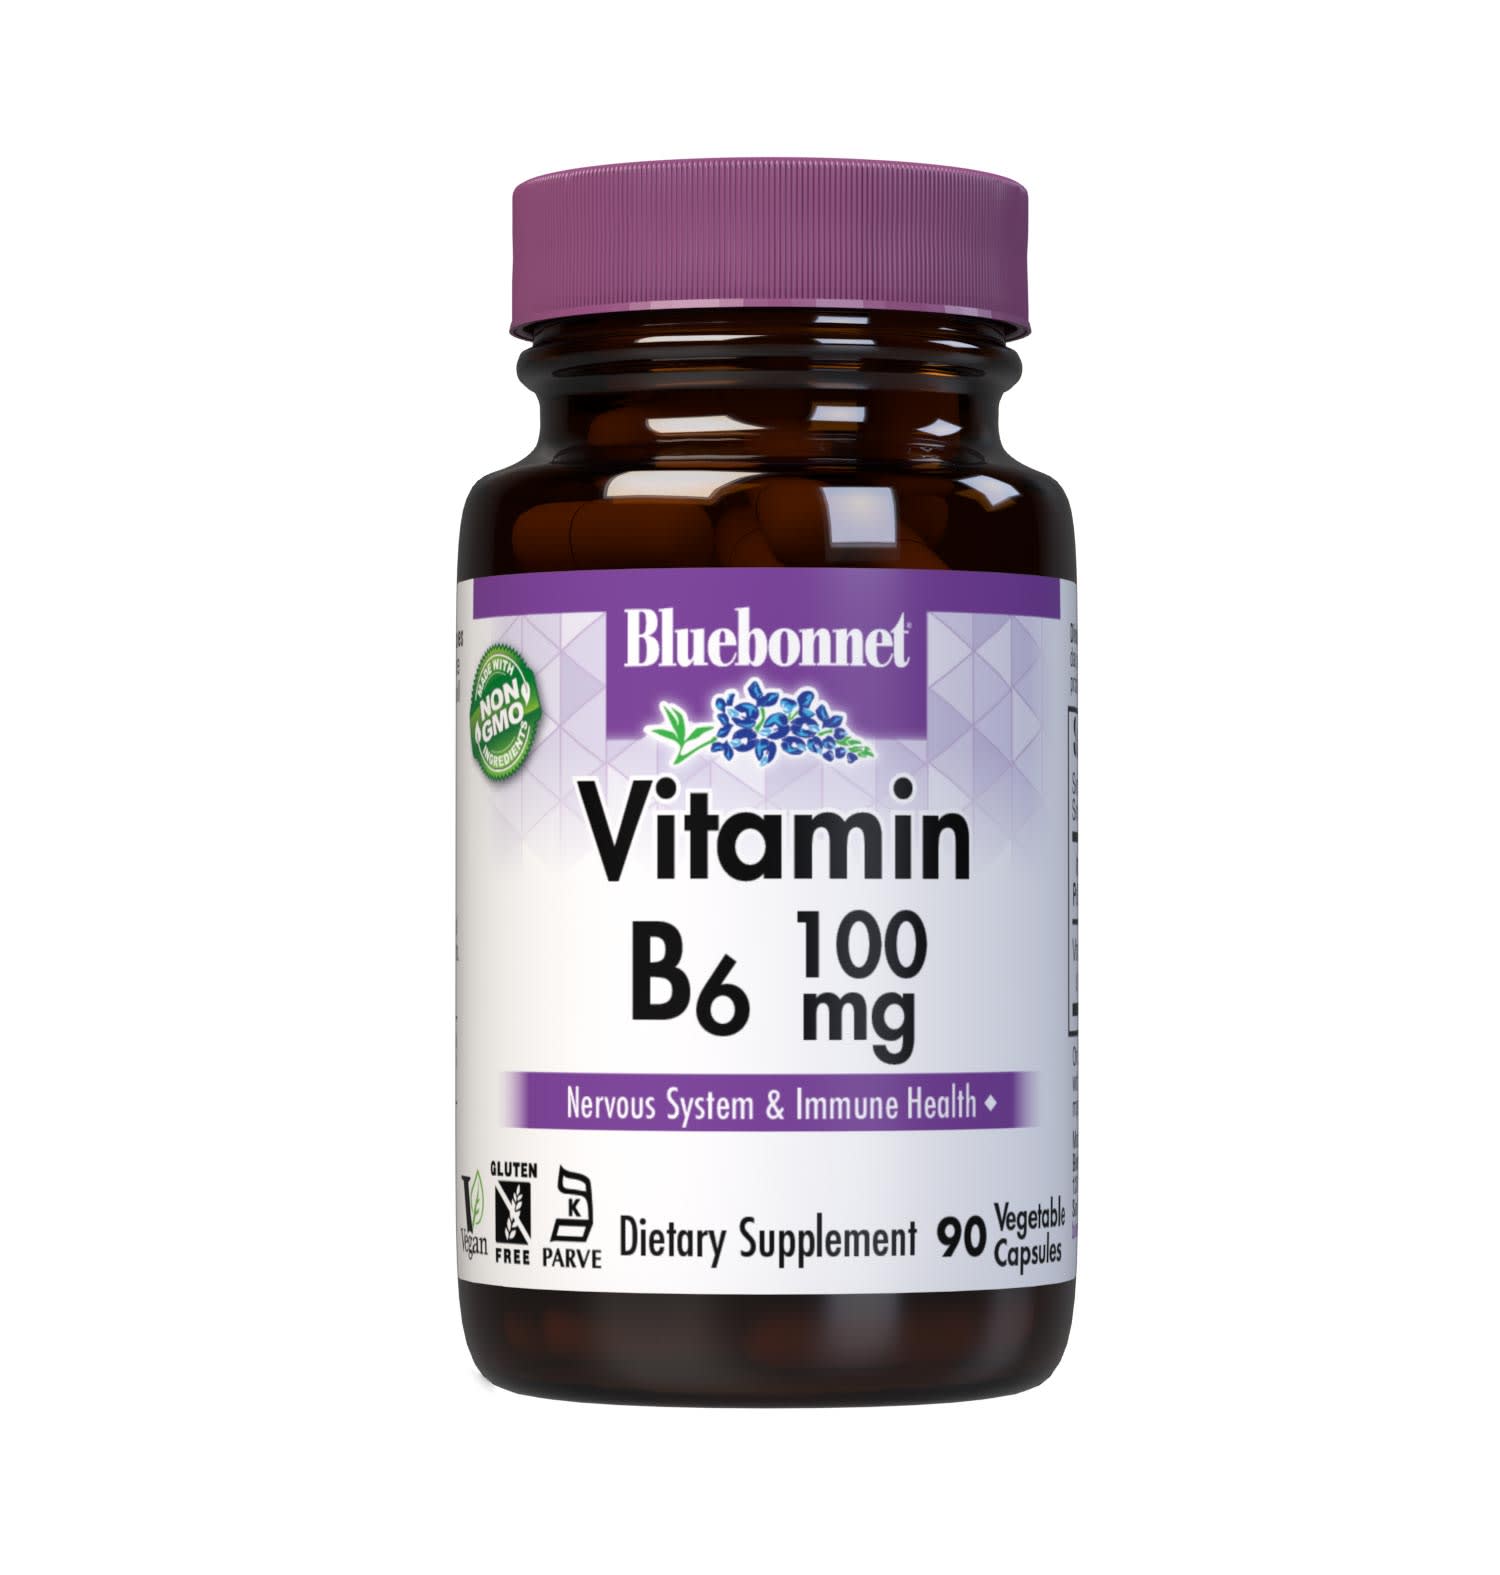 Bluebonnet’s Vitamin B6 100 mg Vegetable Capsules are formulated with crystalline vitamin B6 (pyridoxine HCI) which may support the nervous system, as well as immune and cardiovascular health. #size_90 count